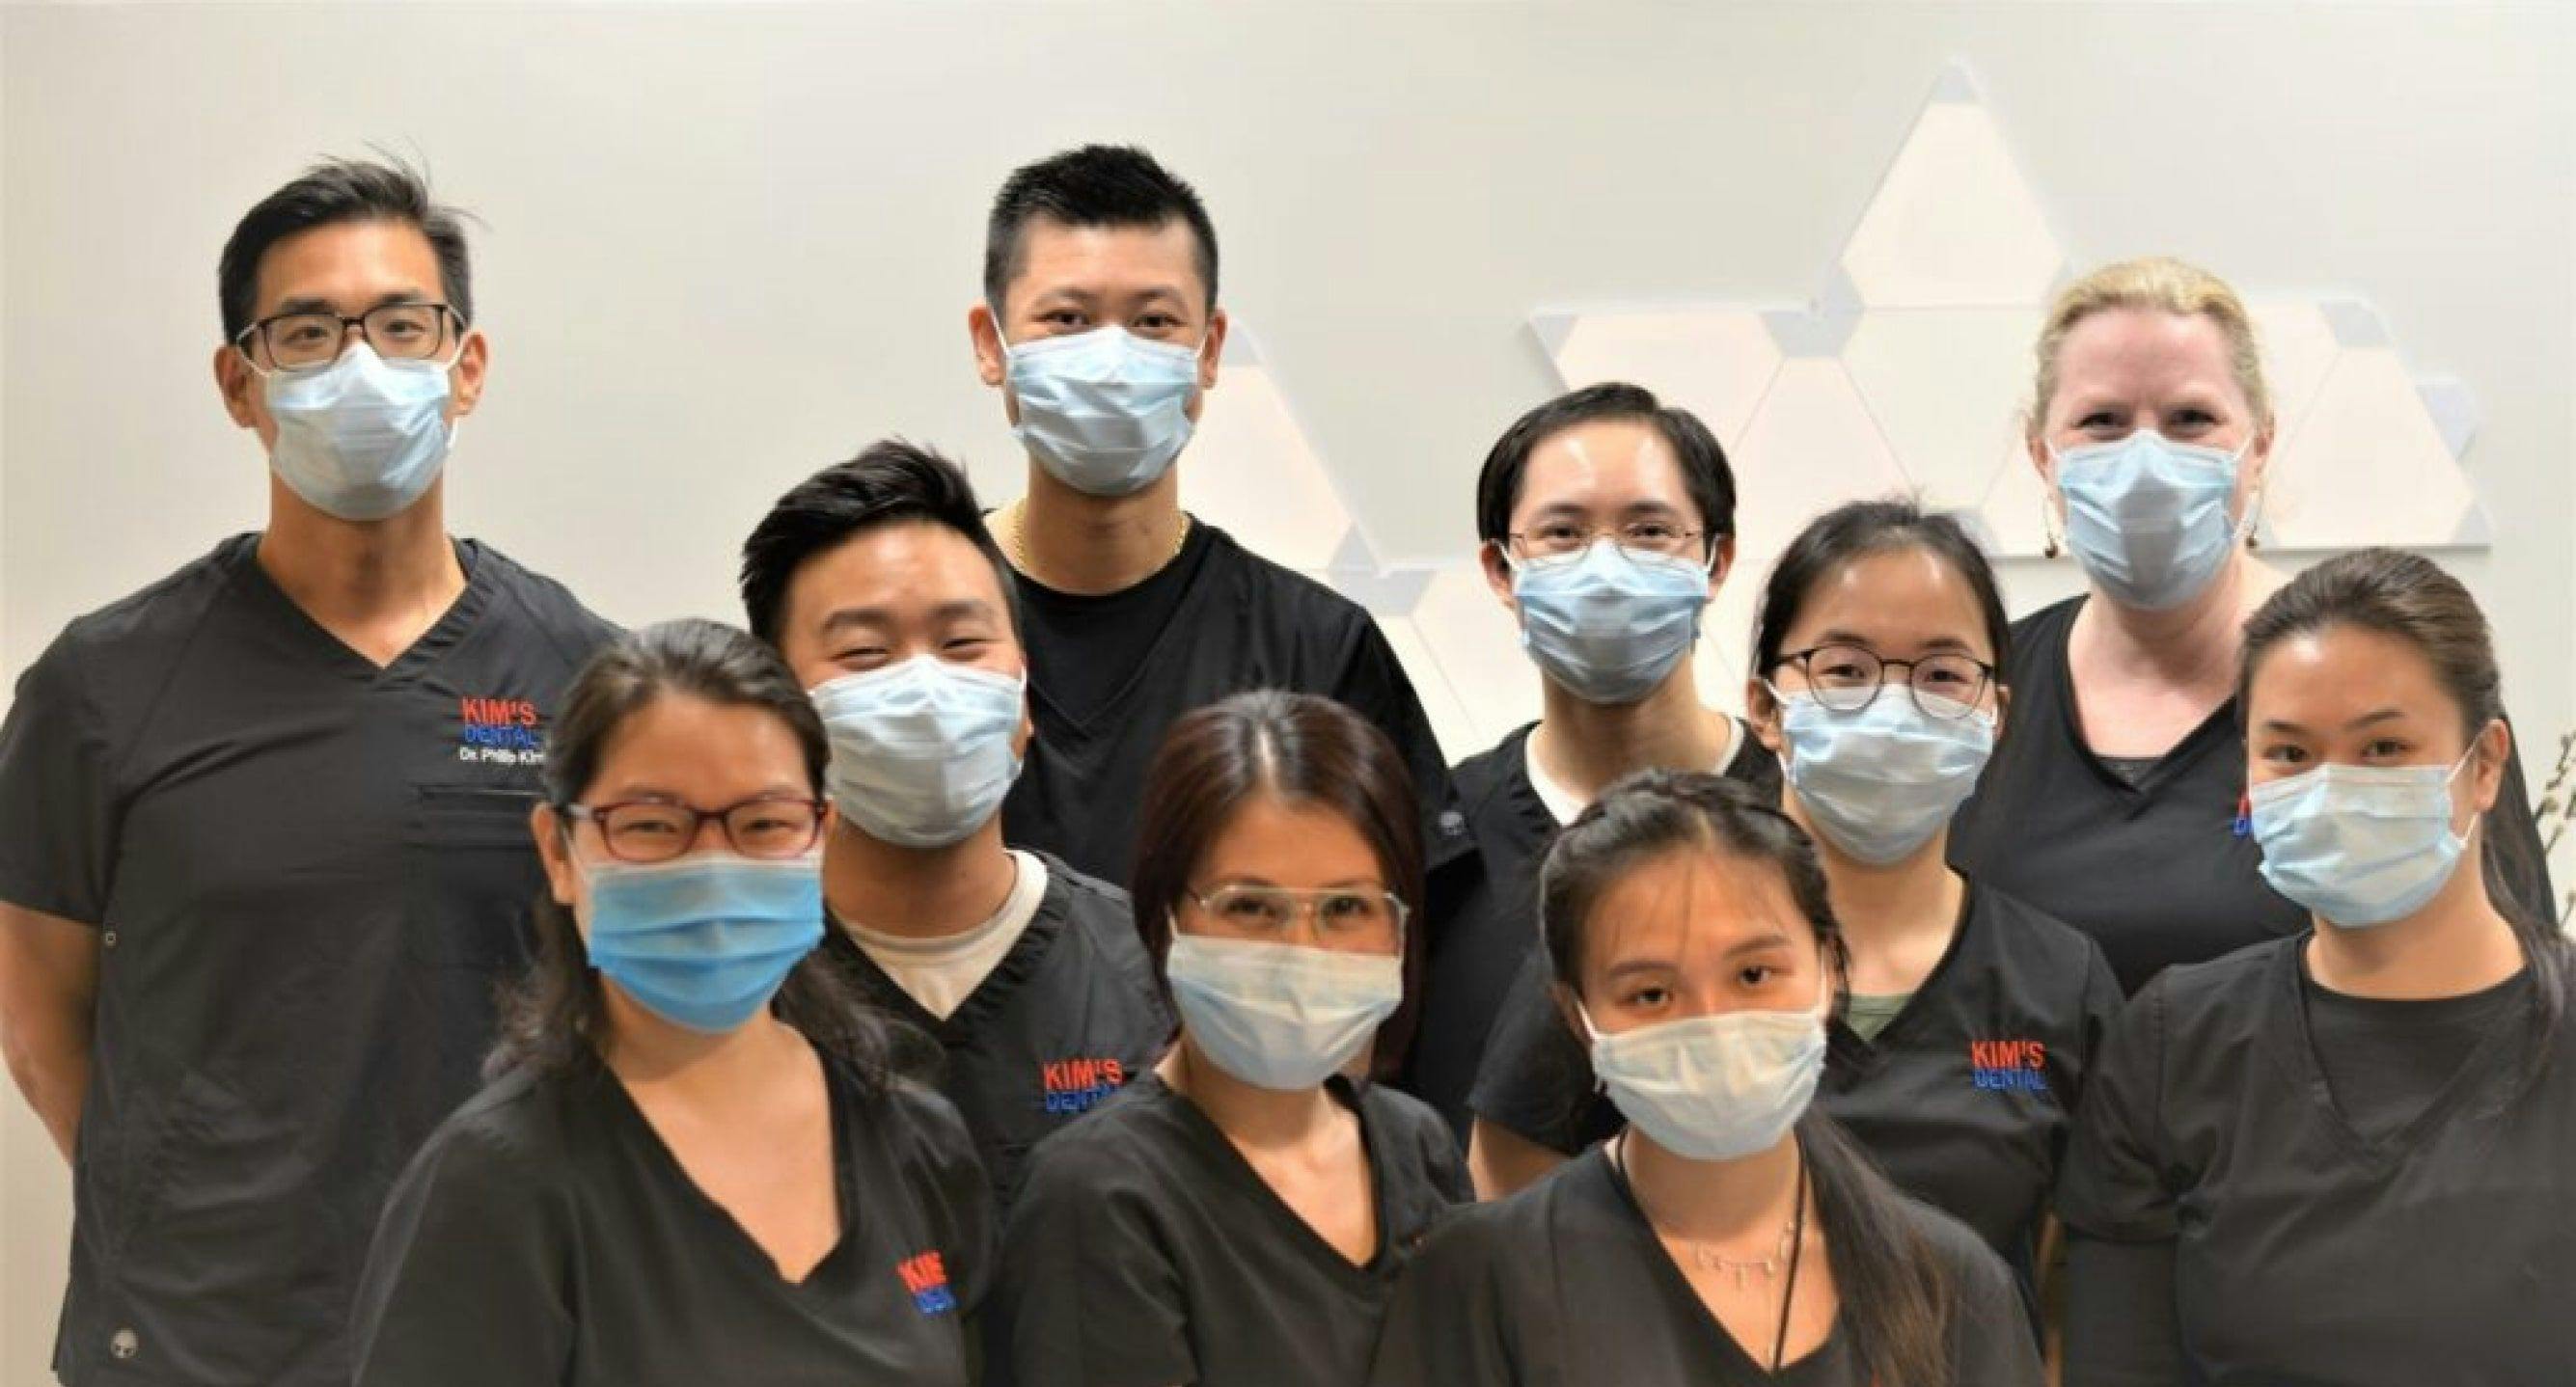 The team working at Kim's Dental